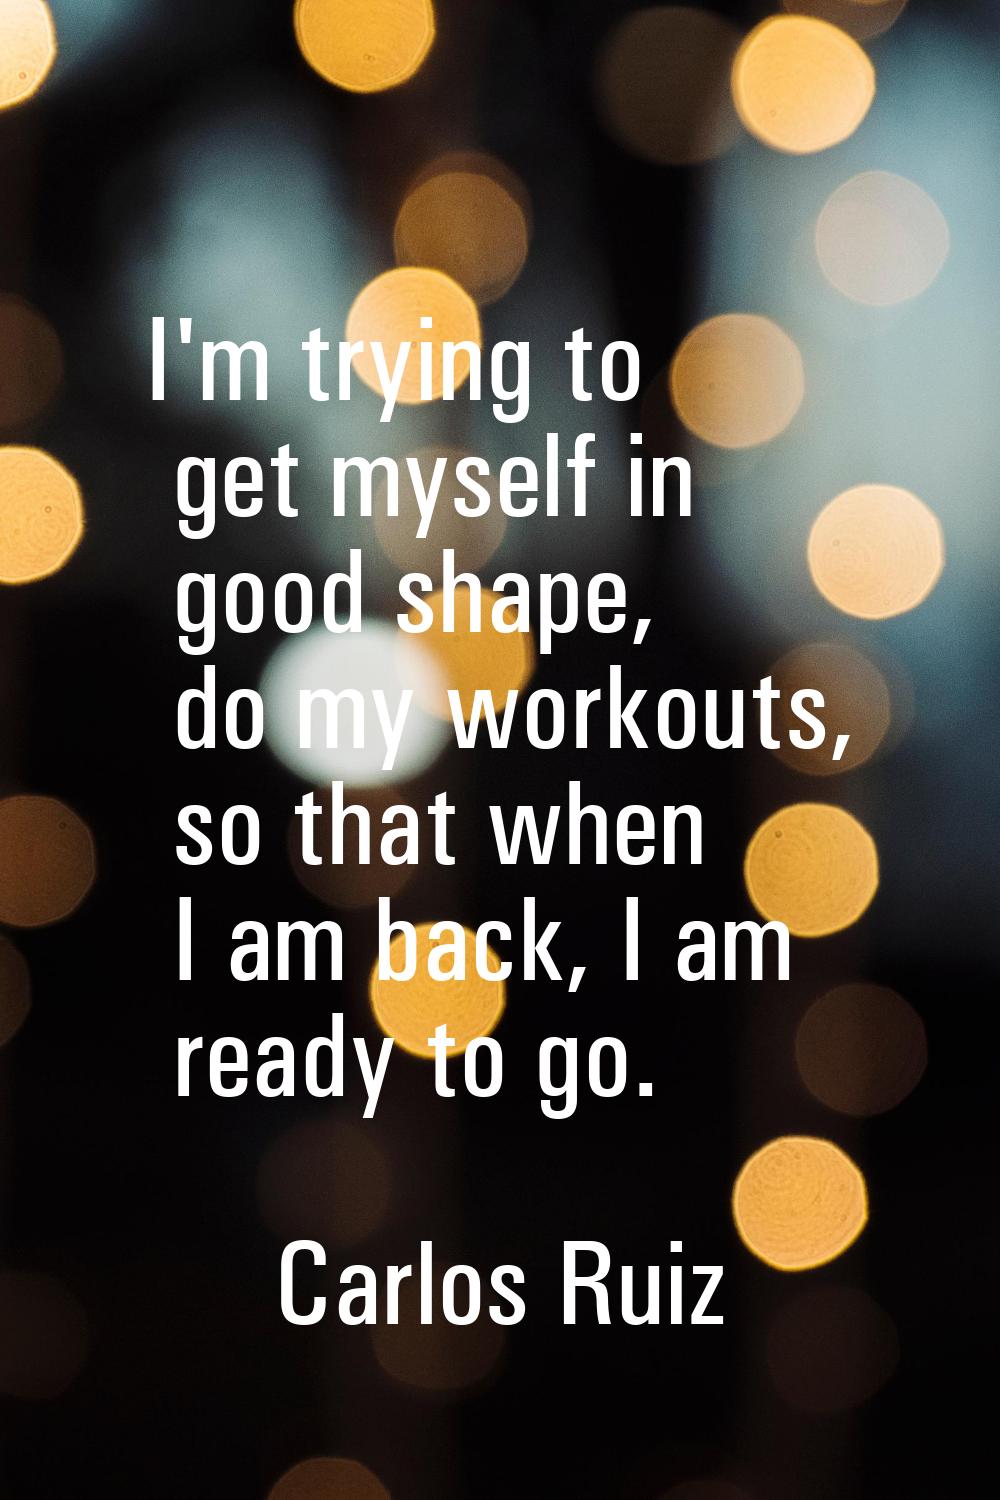 I'm trying to get myself in good shape, do my workouts, so that when I am back, I am ready to go.